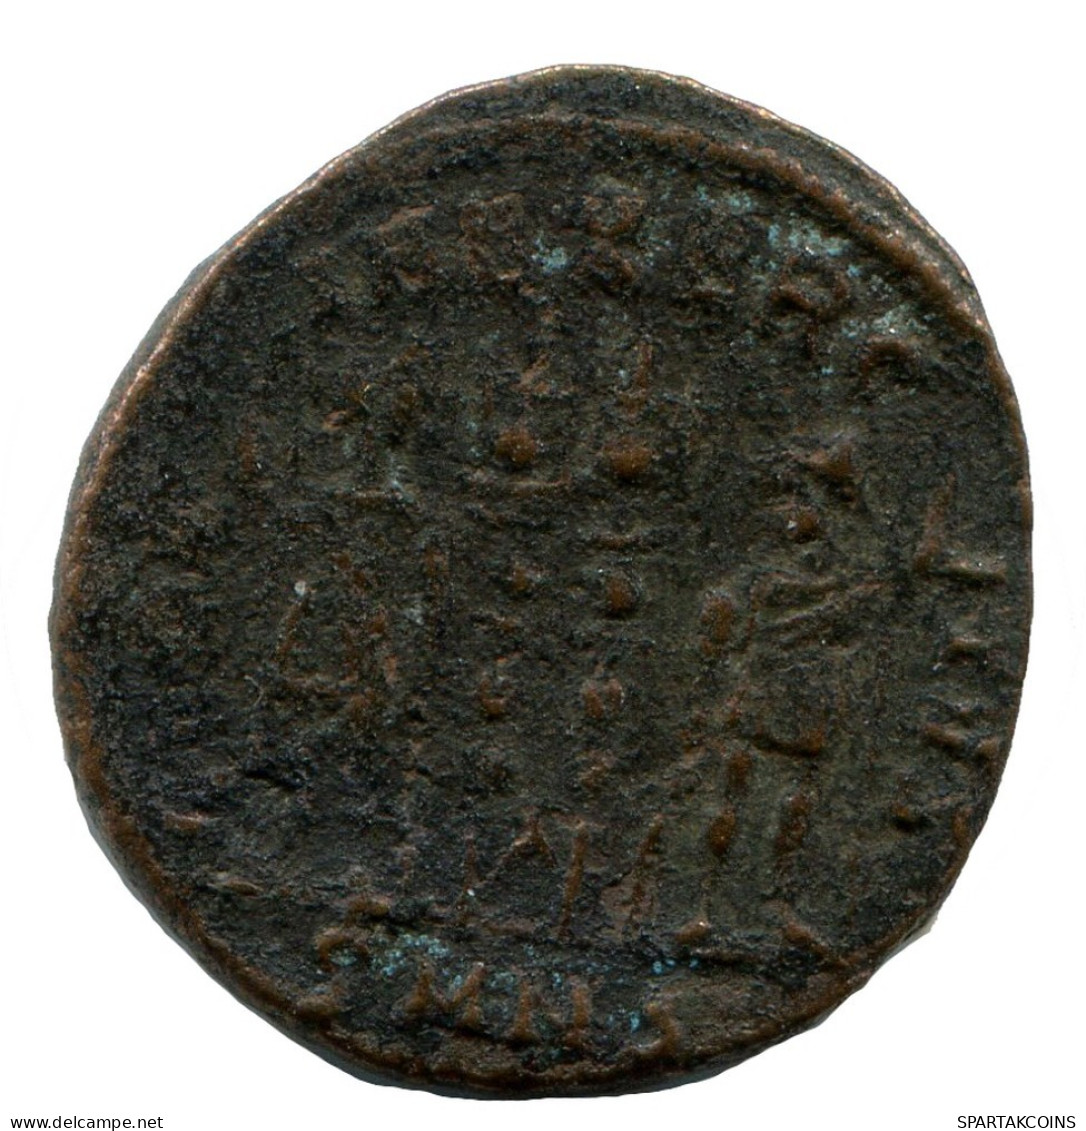 CONSTANTINE I MINTED IN NICOMEDIA FOUND IN IHNASYAH HOARD EGYPT #ANC10874.14.U.A - The Christian Empire (307 AD To 363 AD)